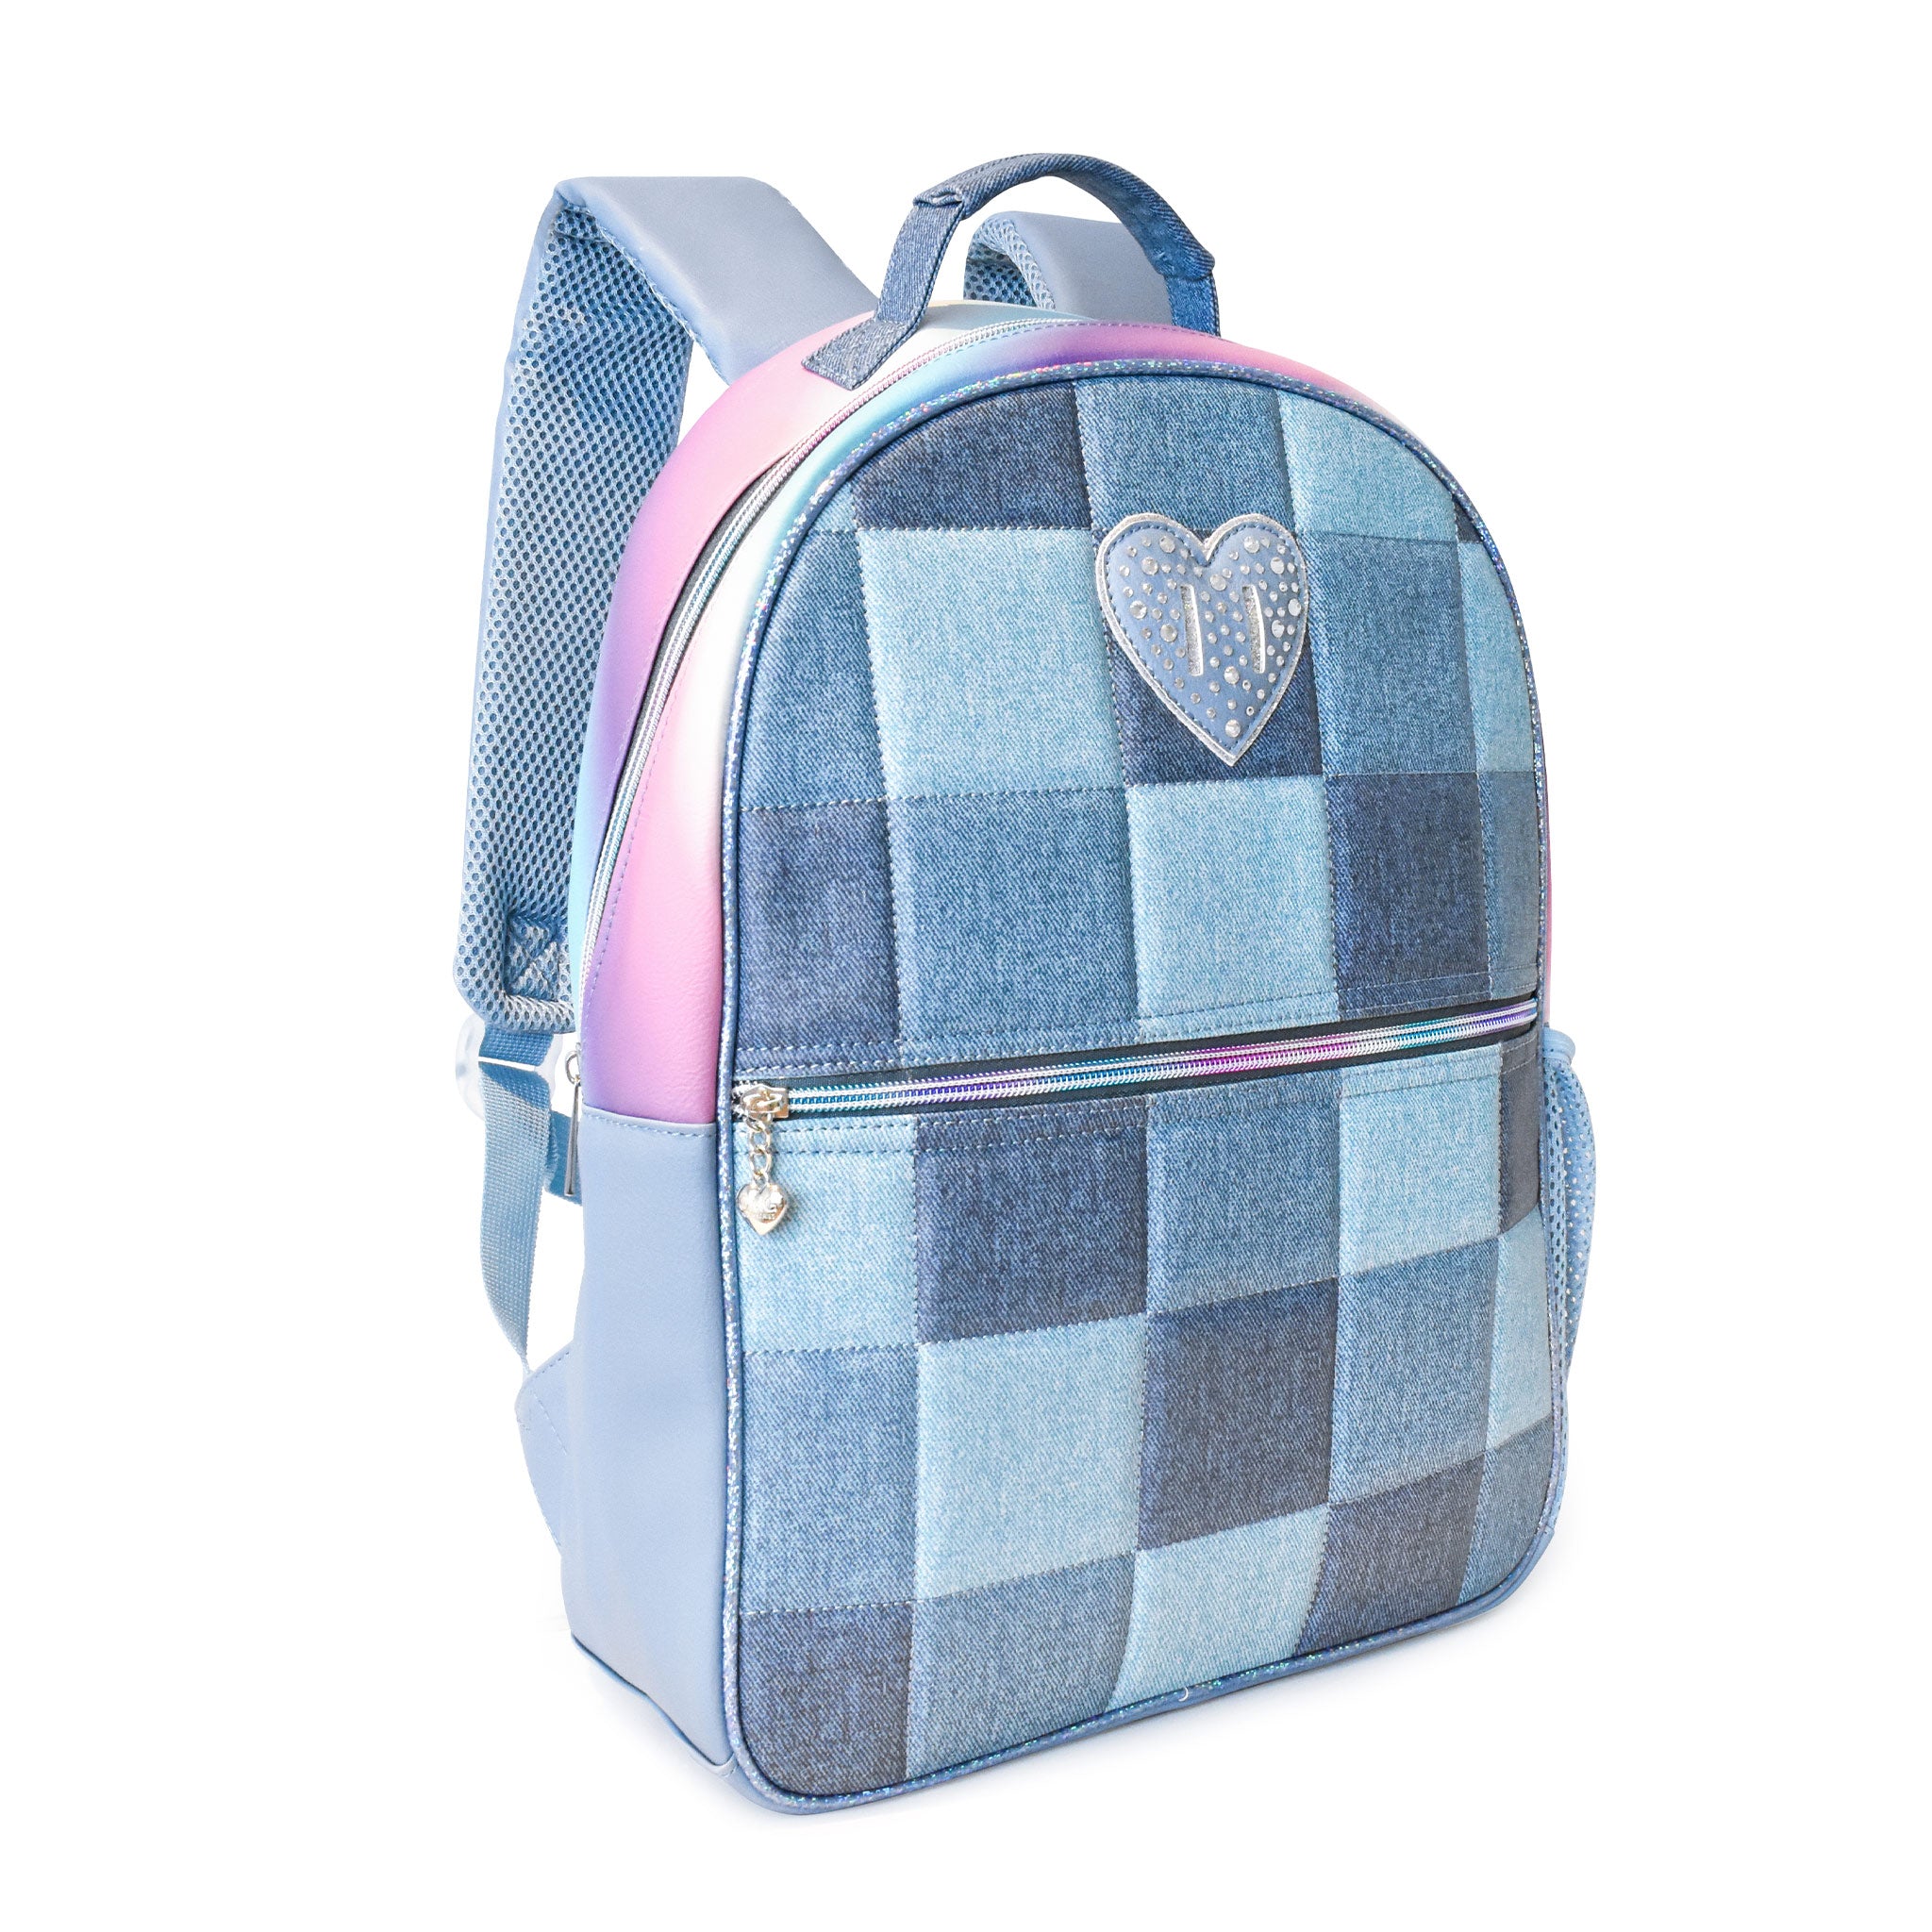 Side view of a denim checkerboard large backpack with rhinestone heart patch